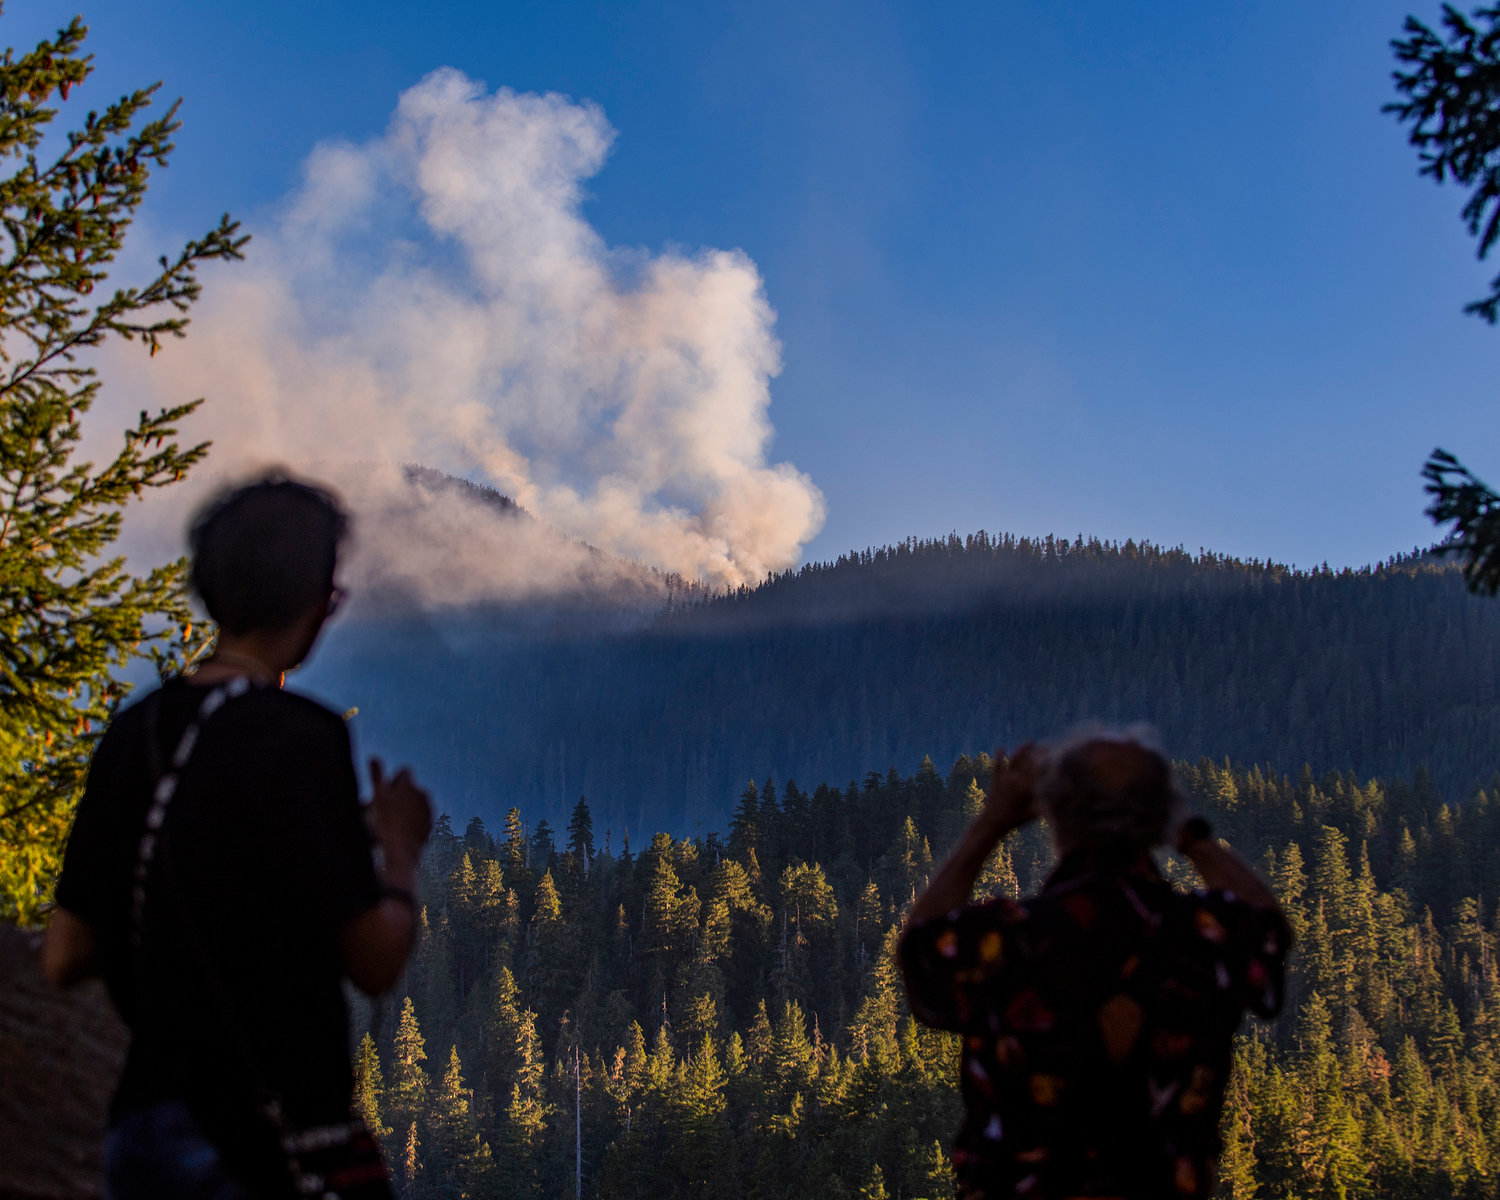 Tom Pell, of the Tri-Cities, right, stops along U.S. Highway 12 east of Packwood to photograph the Goat Rocks Fire with his cellphone on Tuesday.